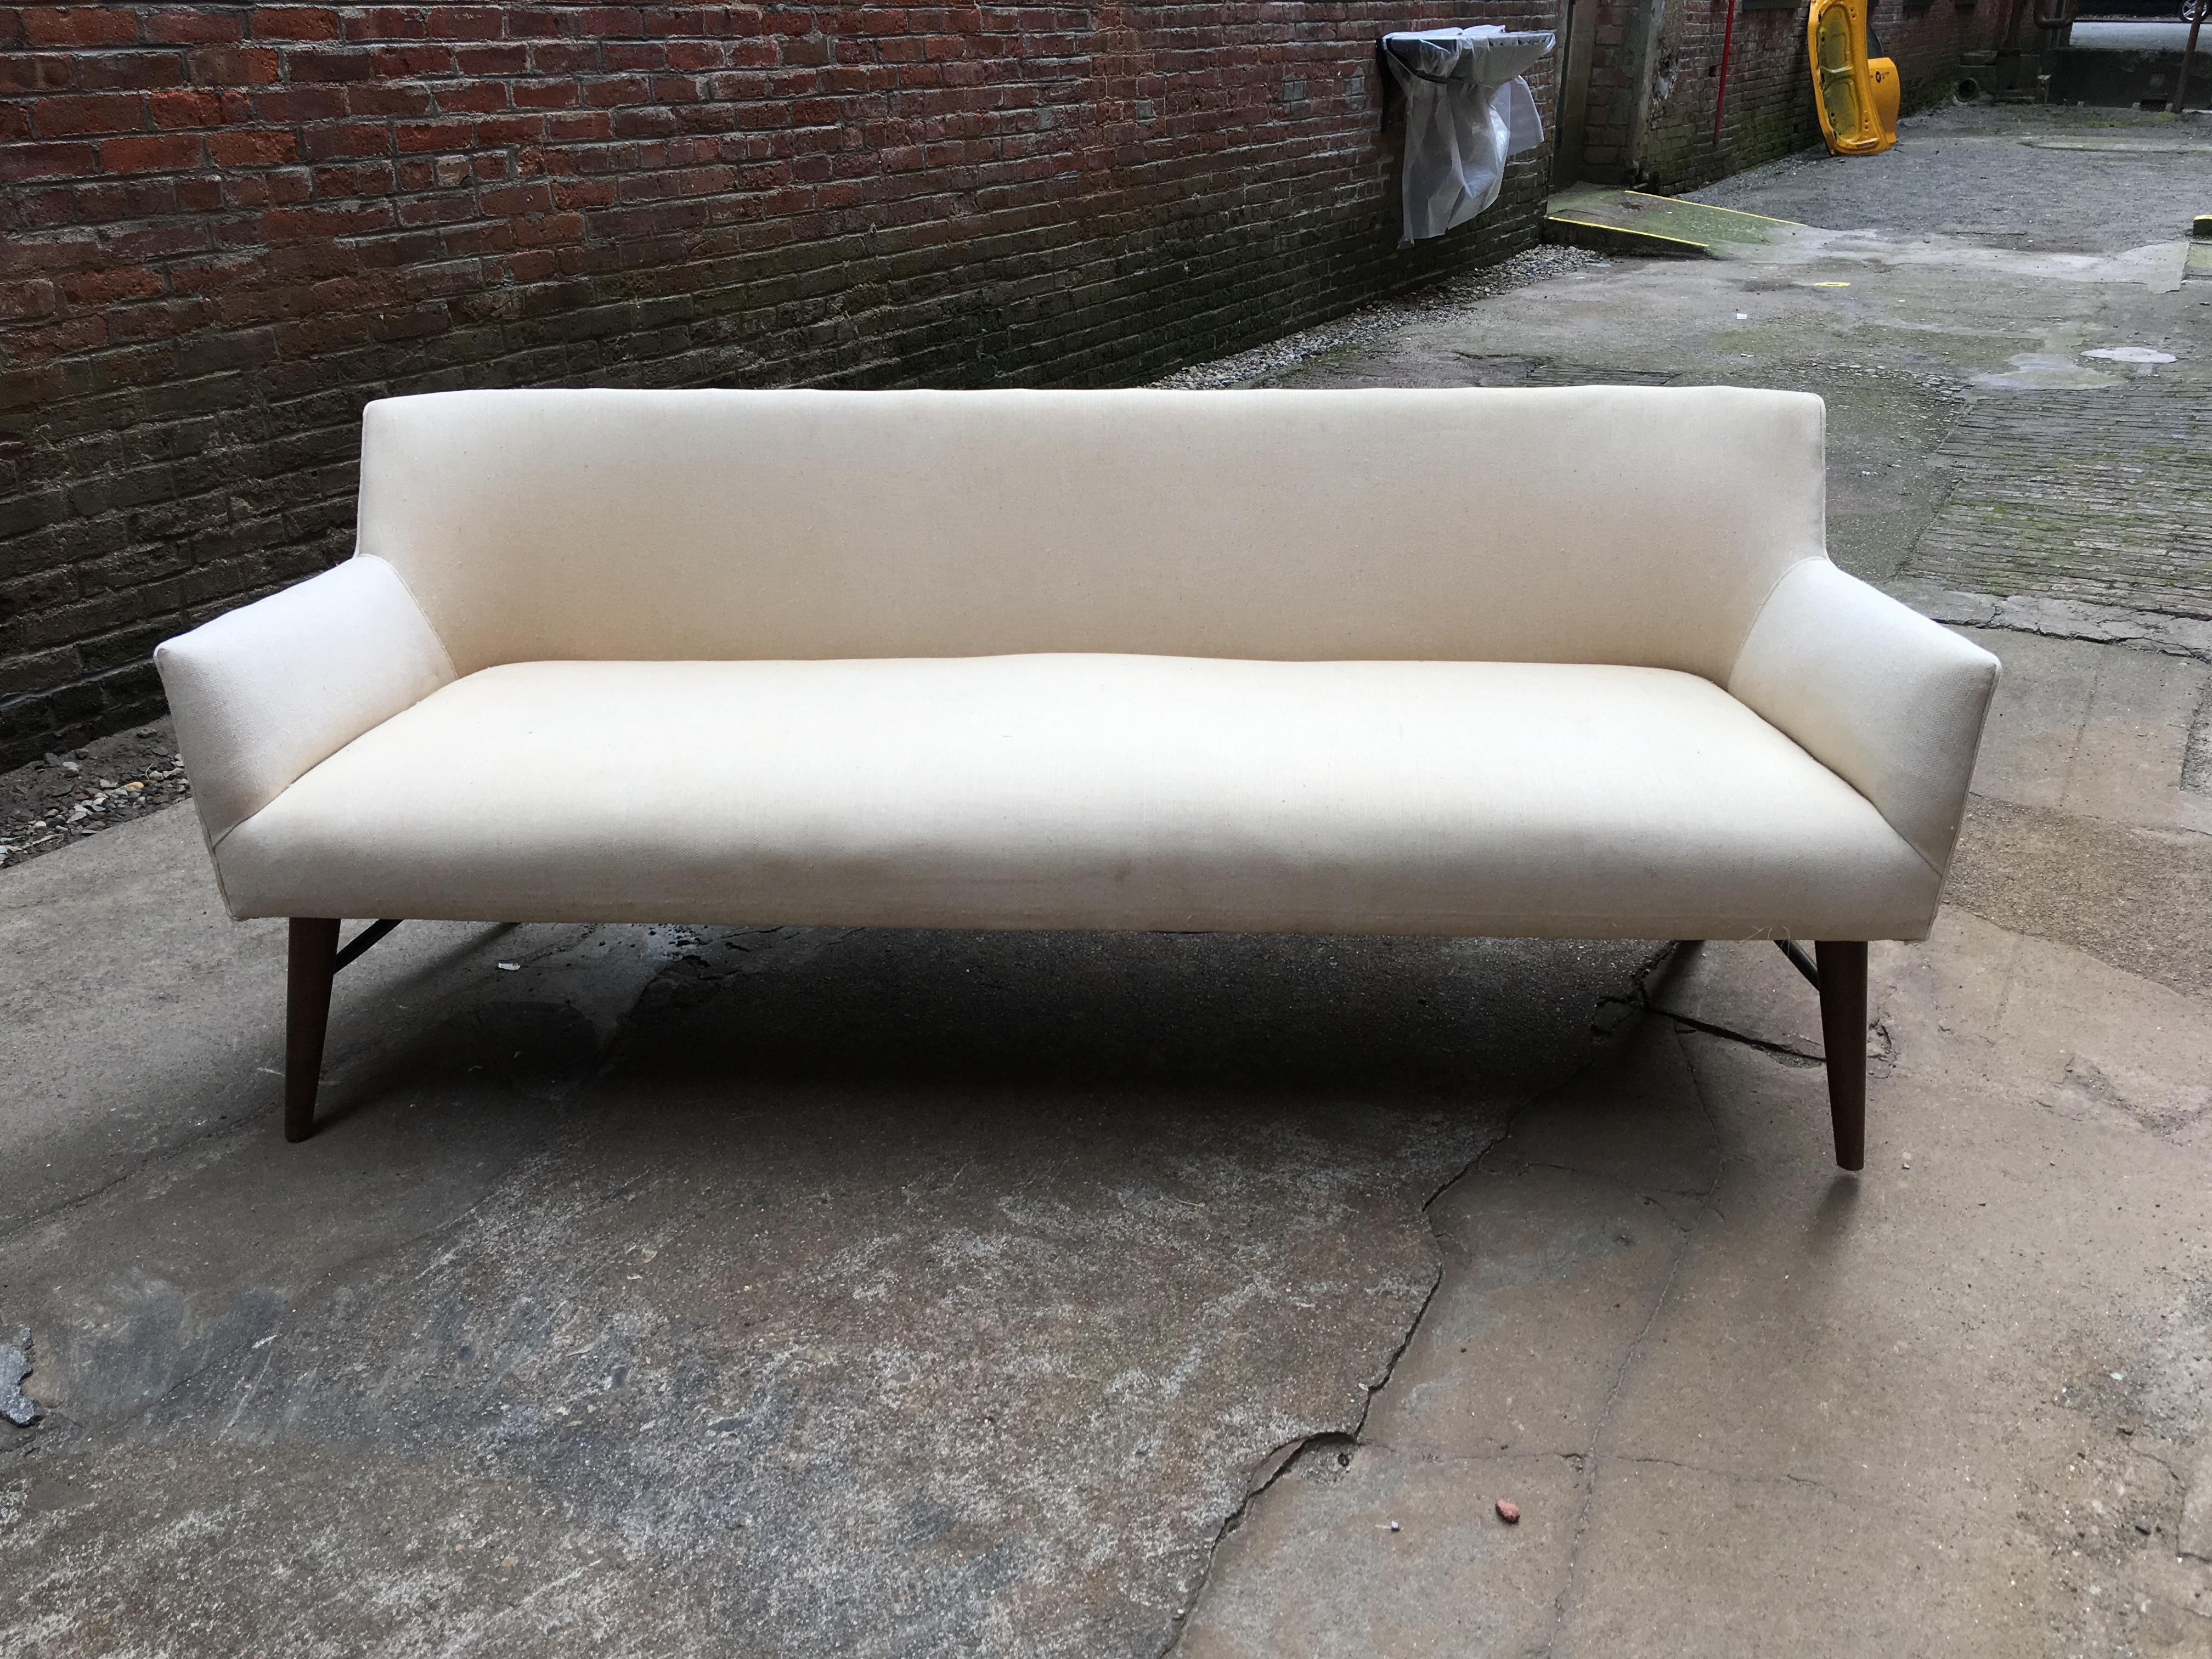 Elegant and refined profile Paul McCobb tub sofa design for Directional. Upholstered seat and back resting on tapered dowel legs with a cross stretcher base. Re-upholstered in the 1980s with a heavy duty white canvas duck cloth.